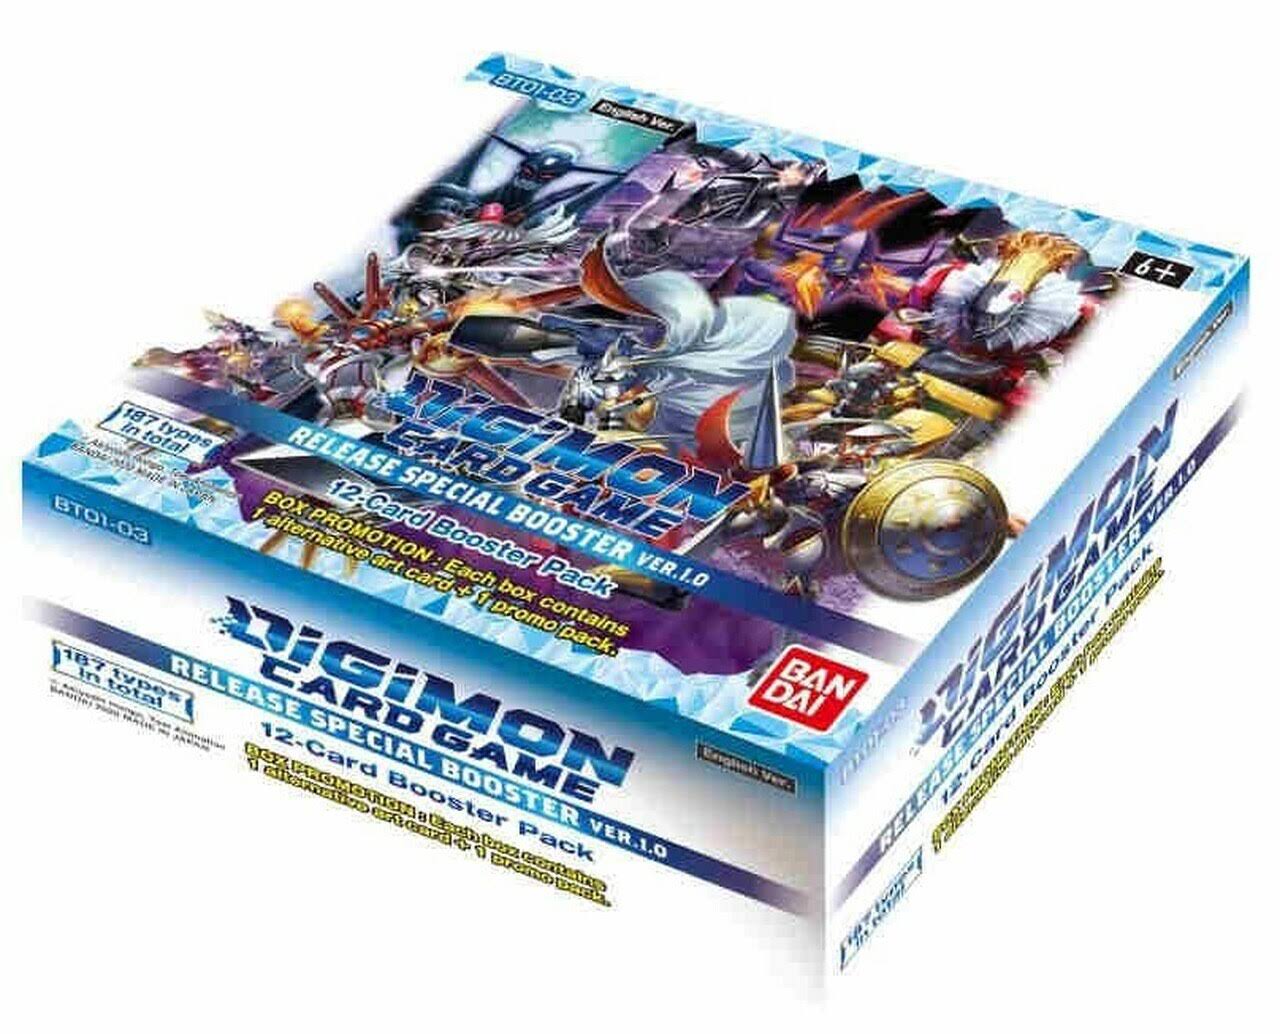 Digimon Ver. 1.0 Release Special Booster Box